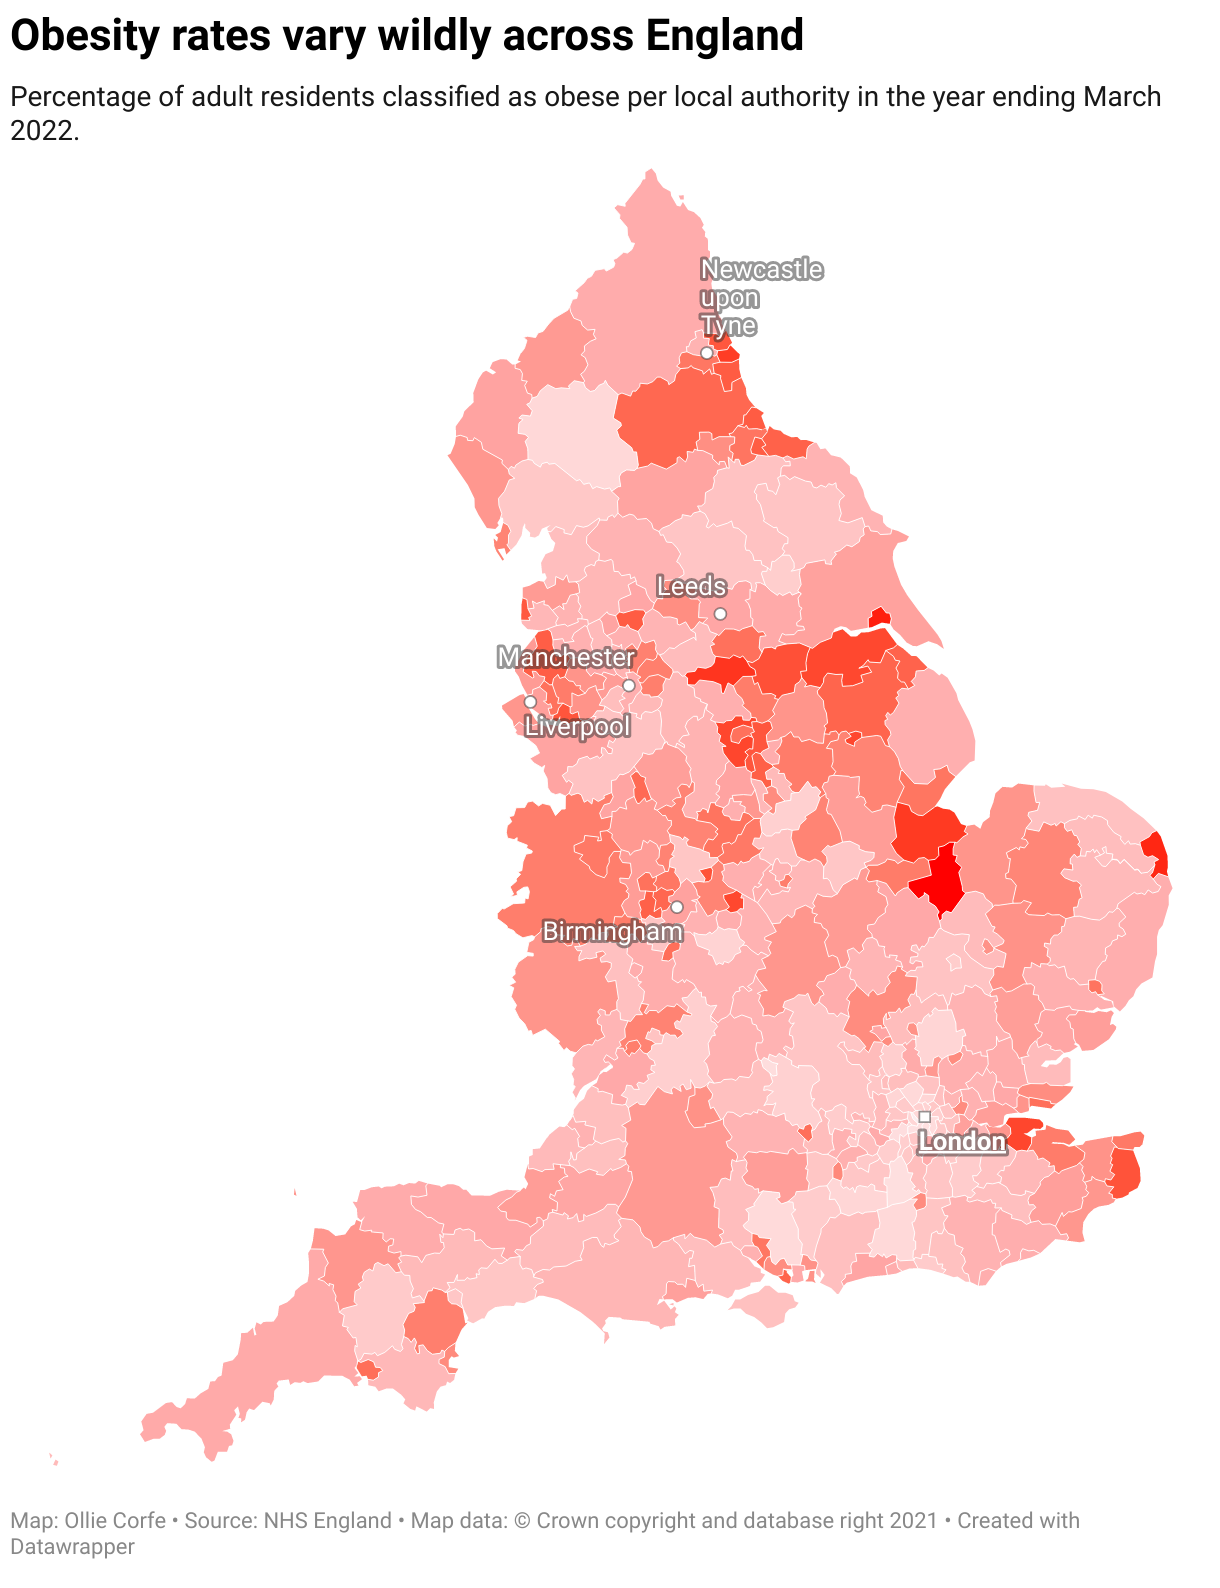 Map of England by obesity rates.